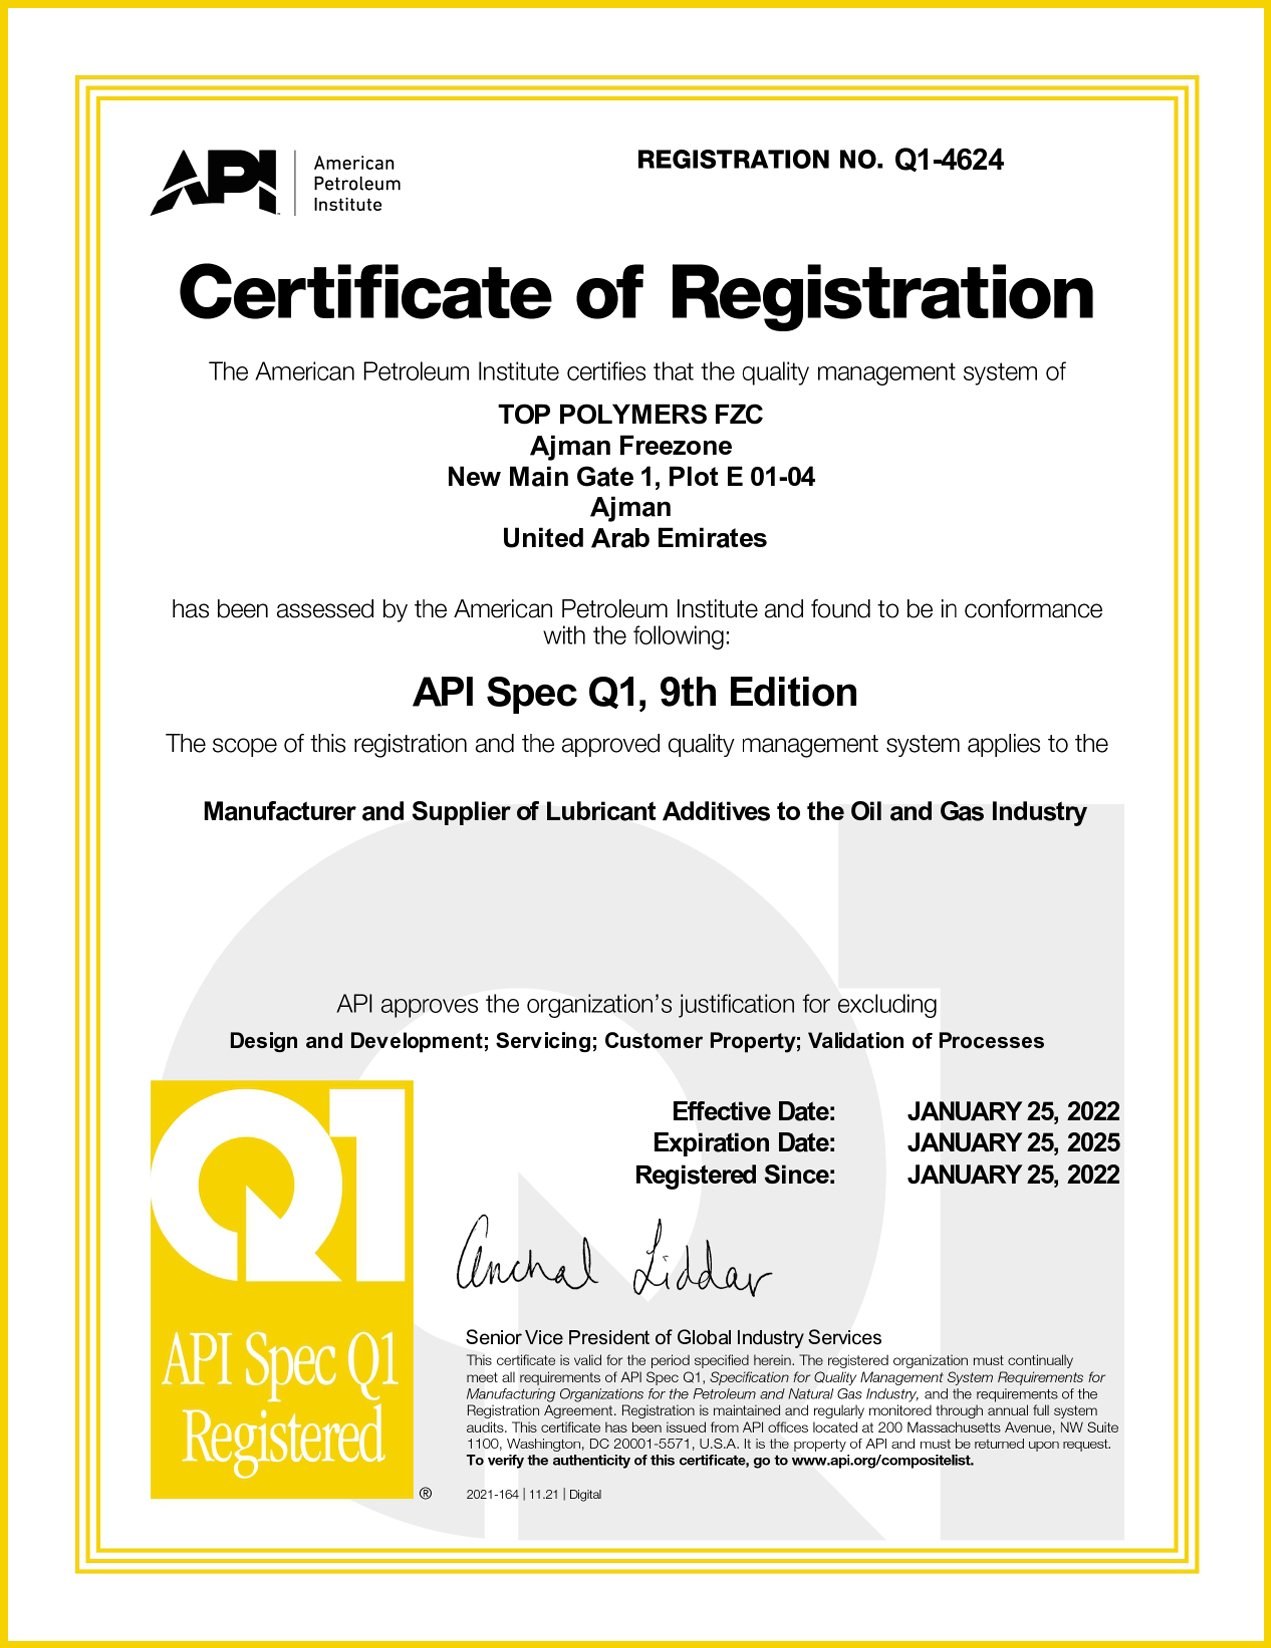 Certificate-Q1-4624_20220125152638_page-0001-1